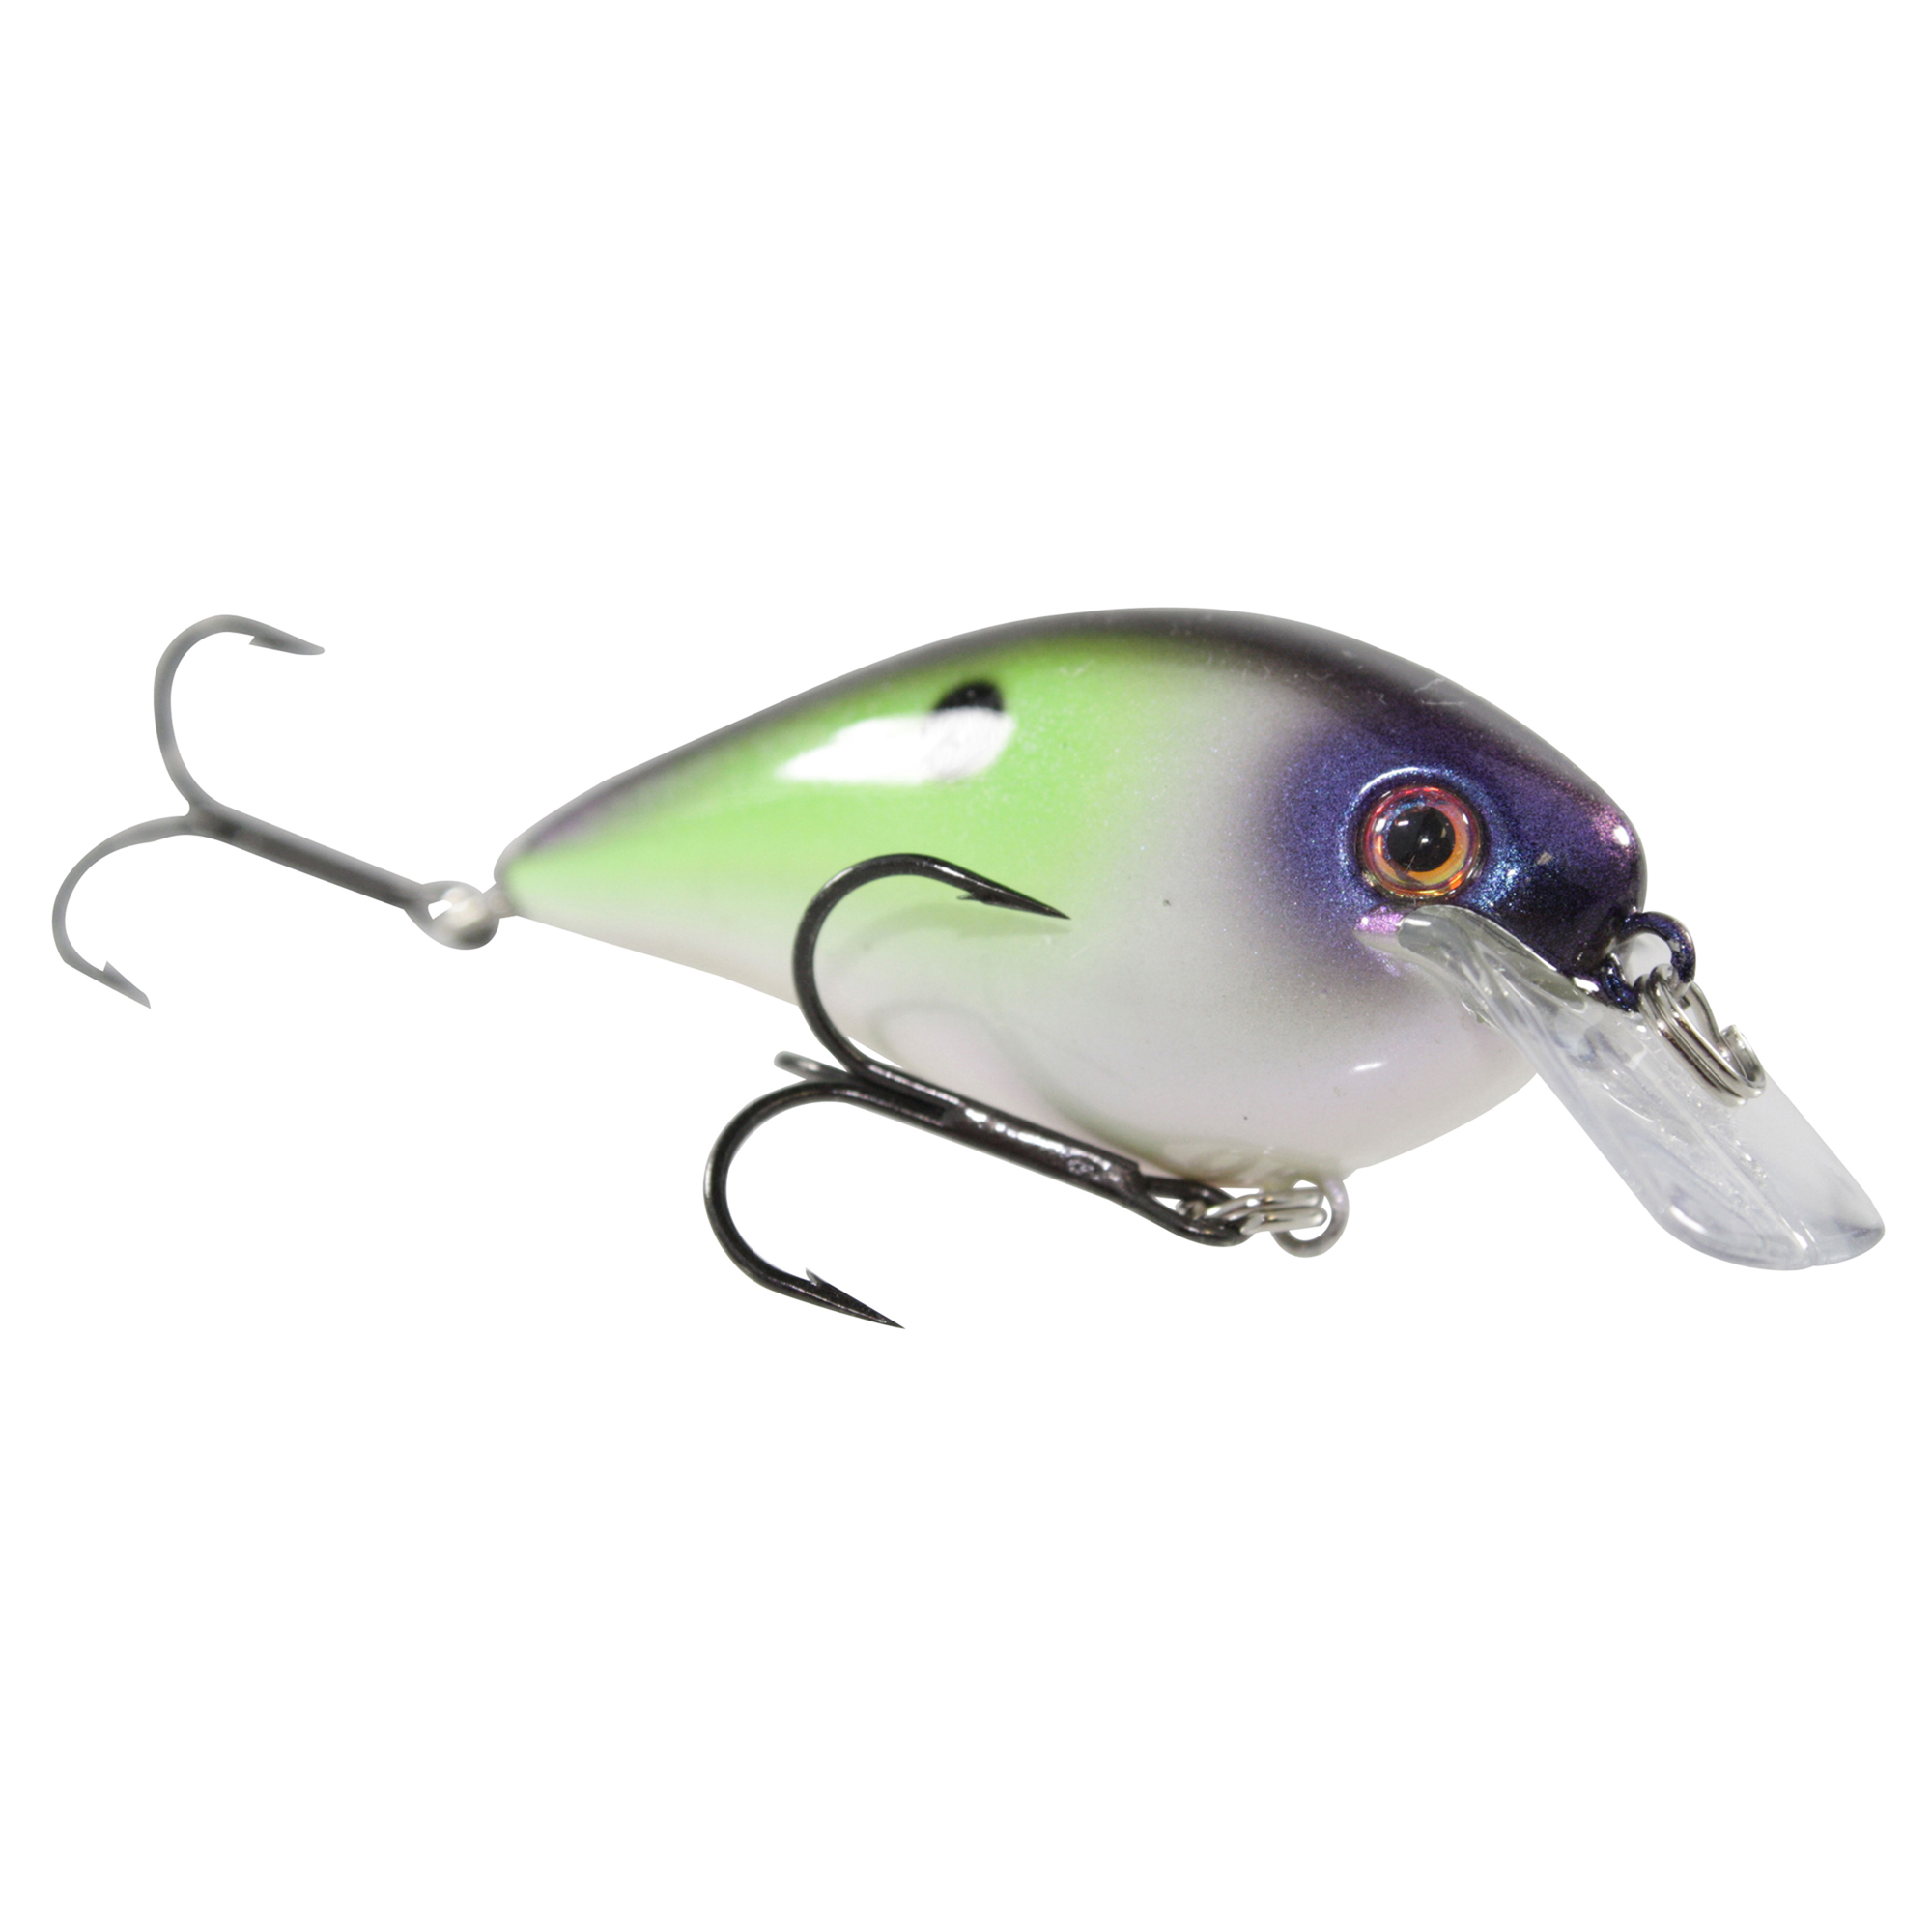 https://www.windingcreekbait.com/store_content/products_media/5dae043896daf.jpg?scale.height=300